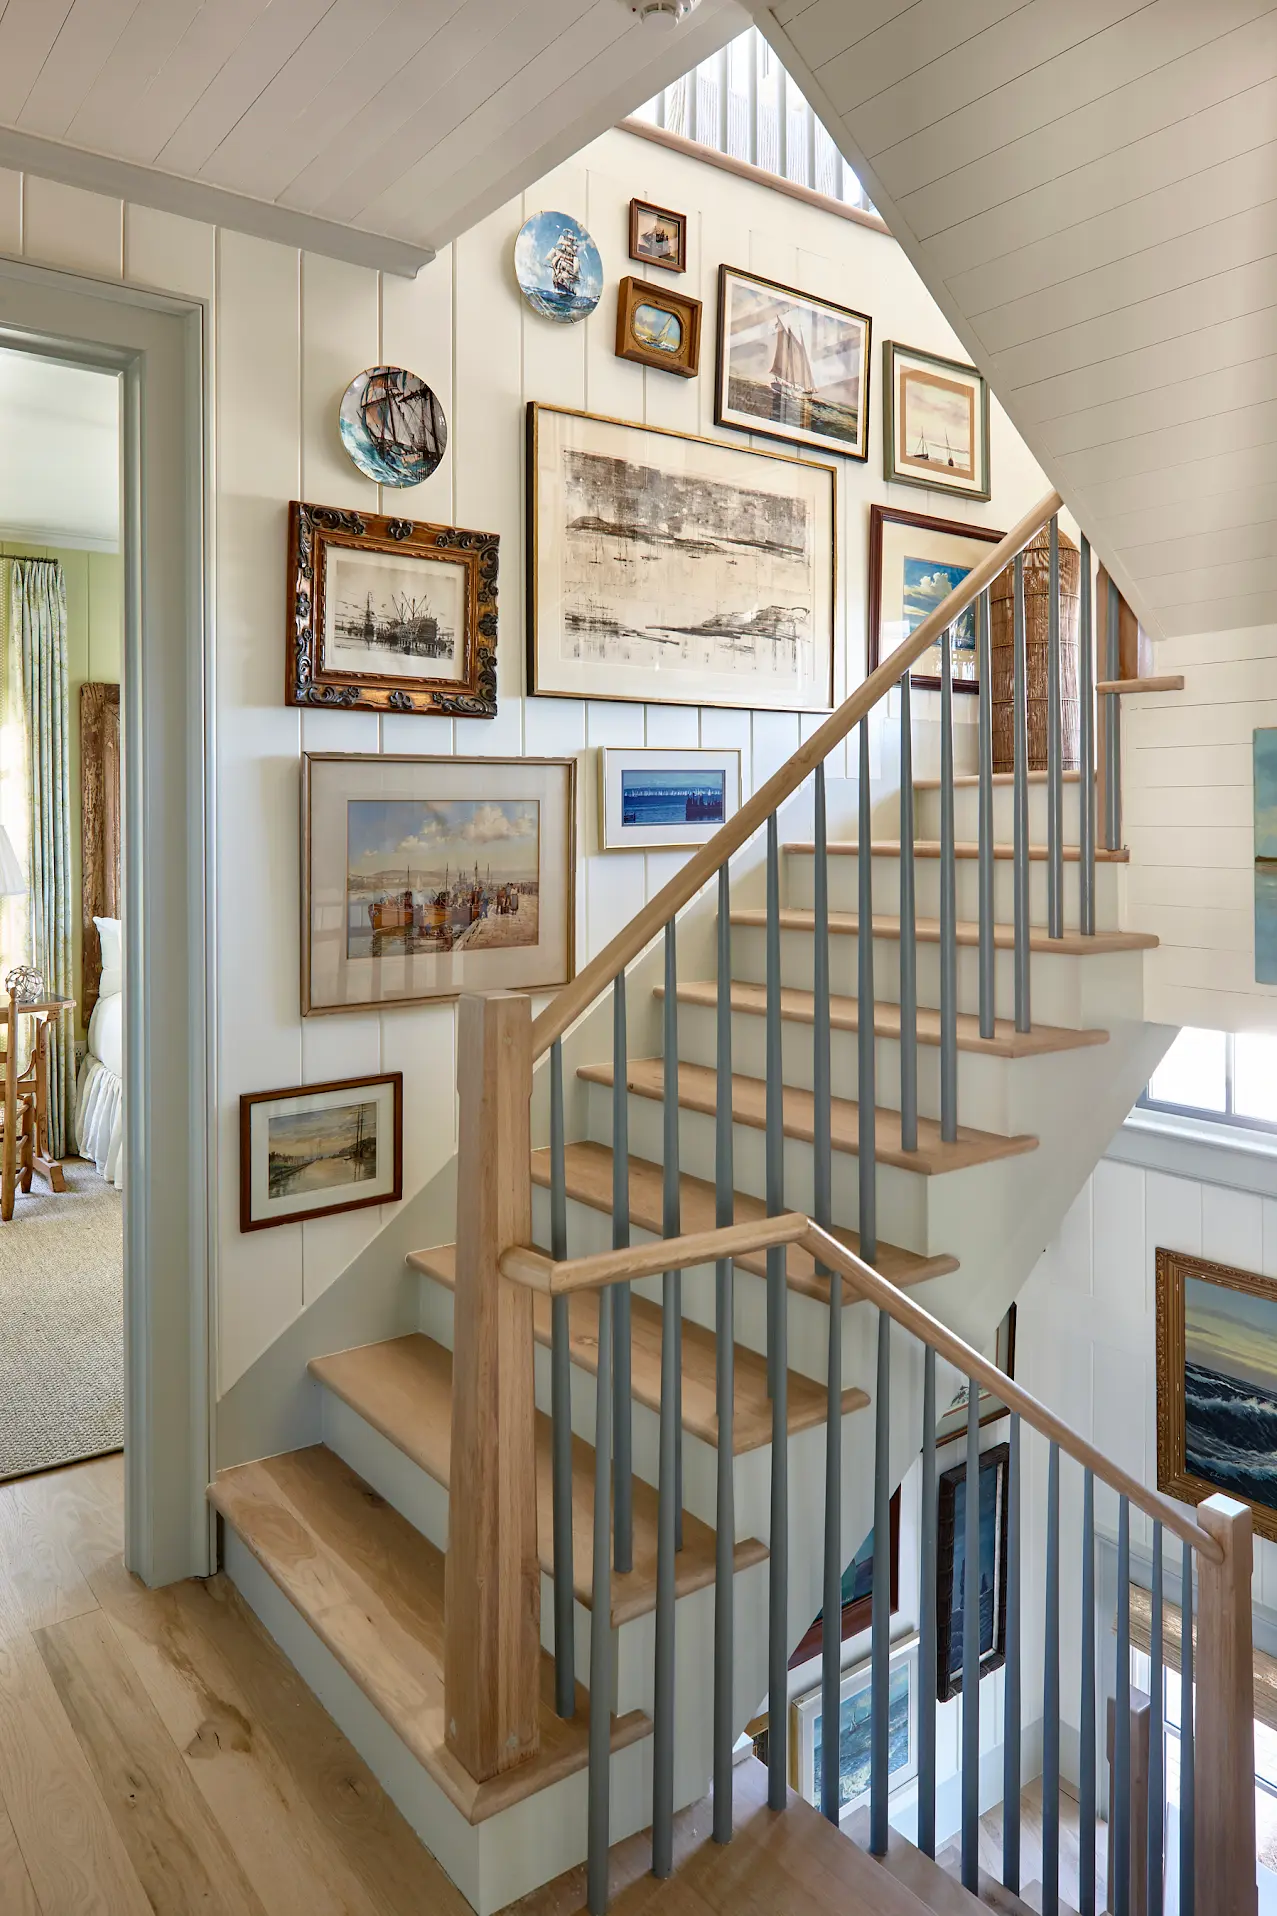 A coastal gallery wall runs up the stairs.